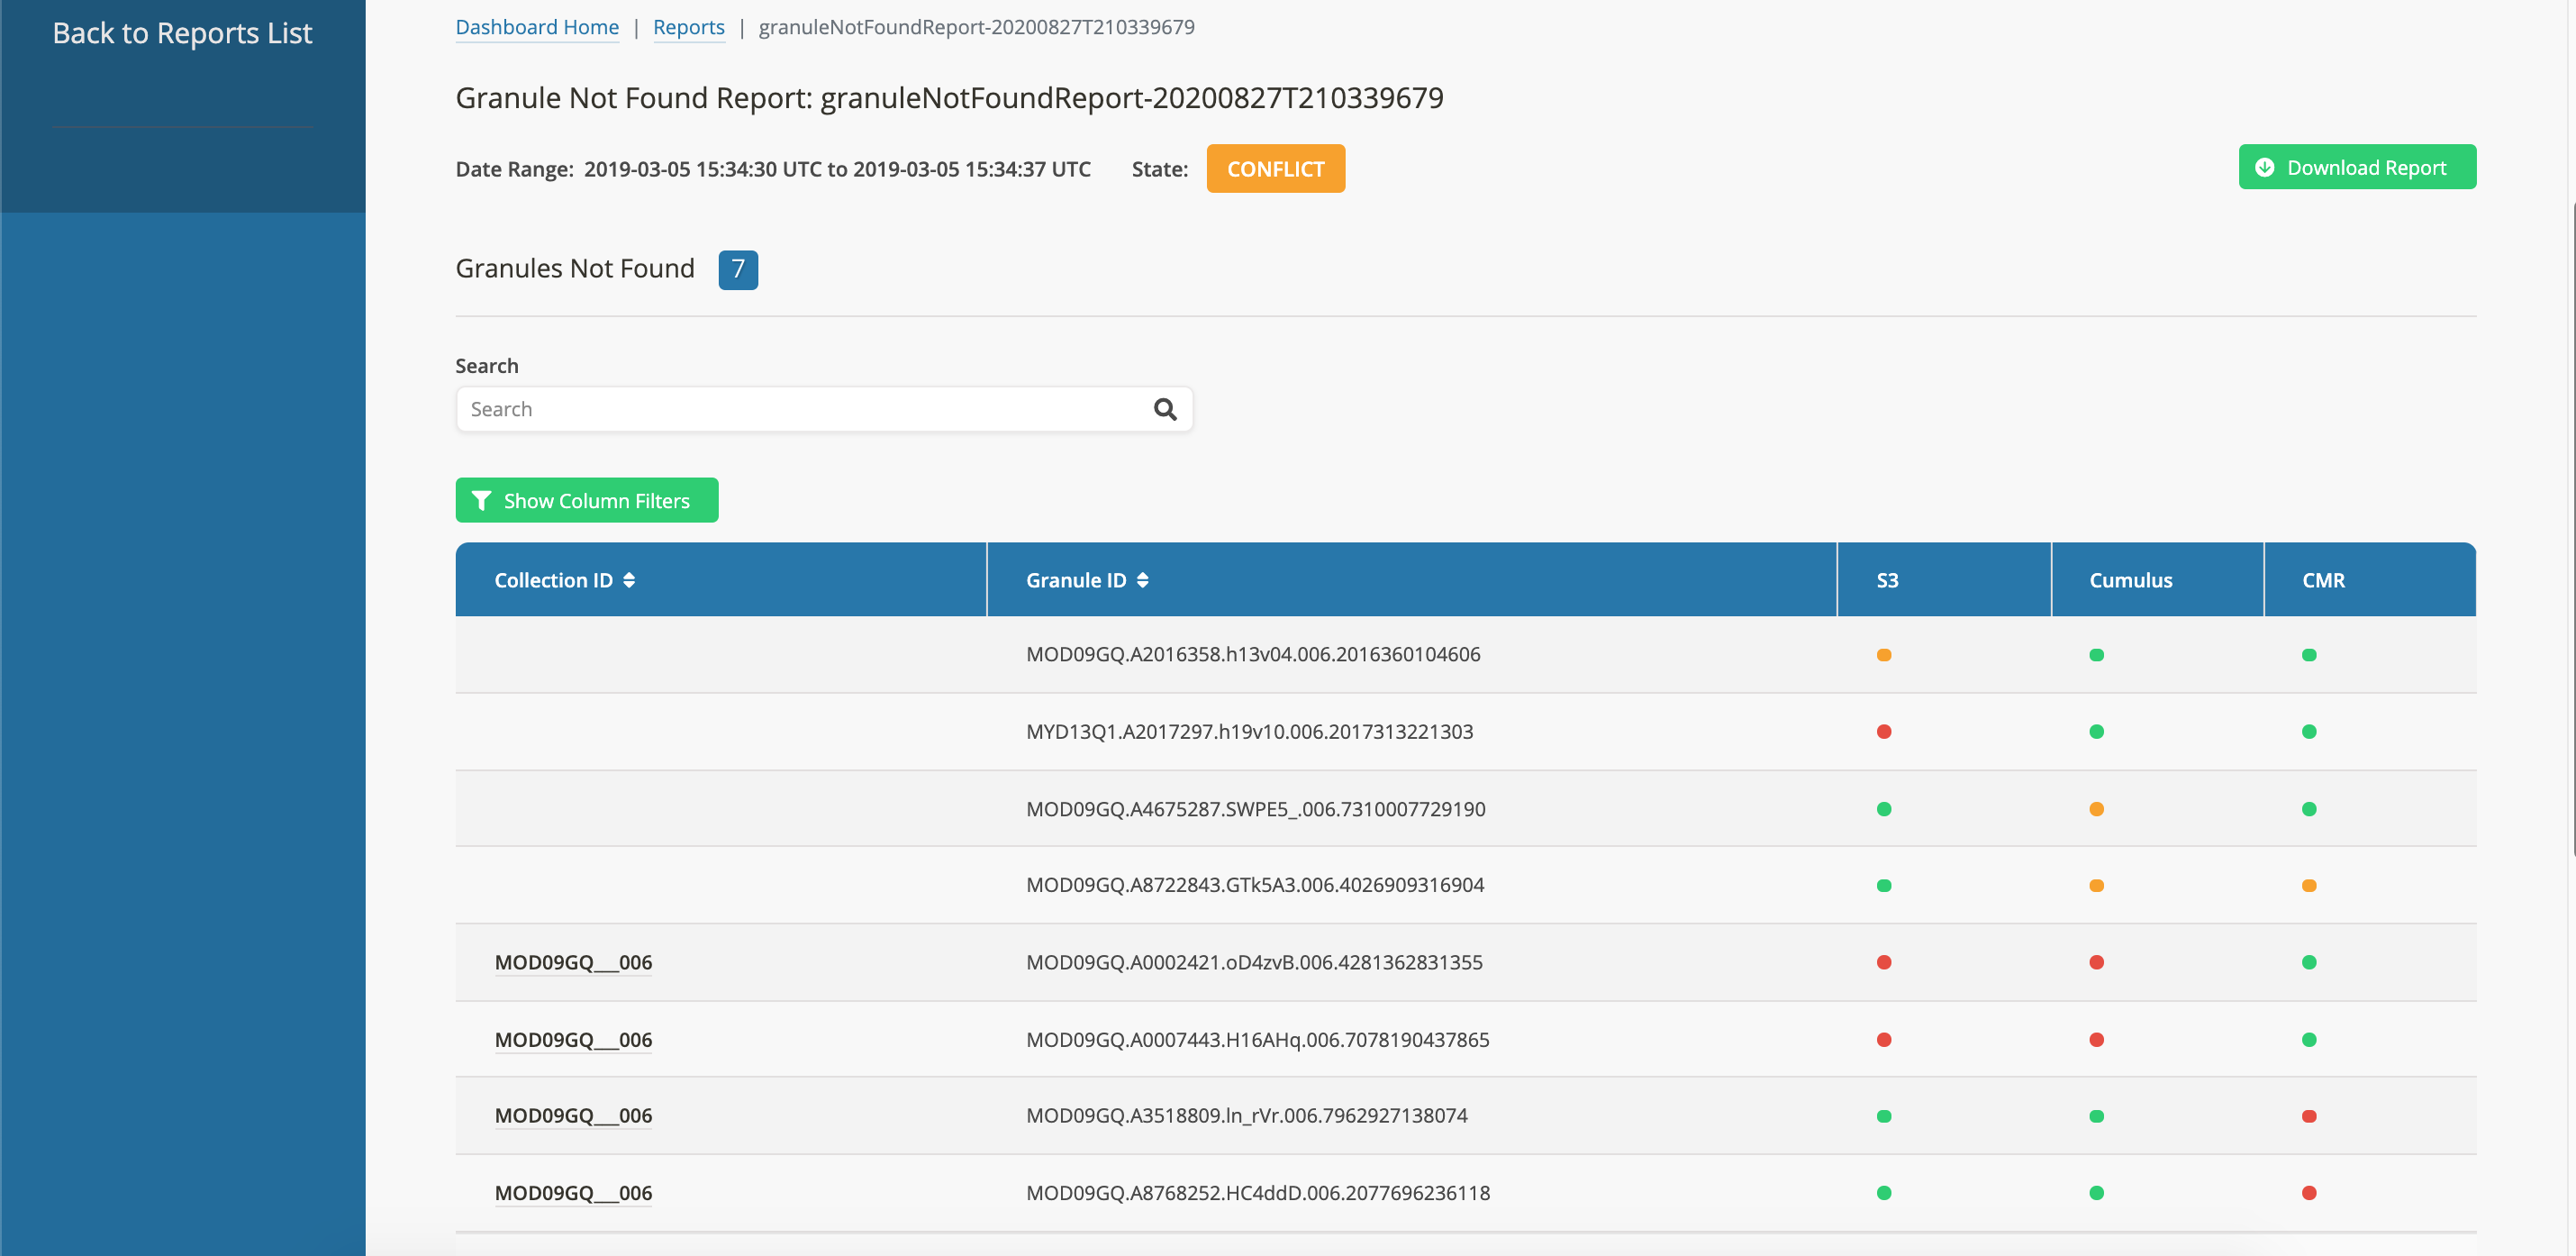 Screenshot of a Granule Not Found Report page